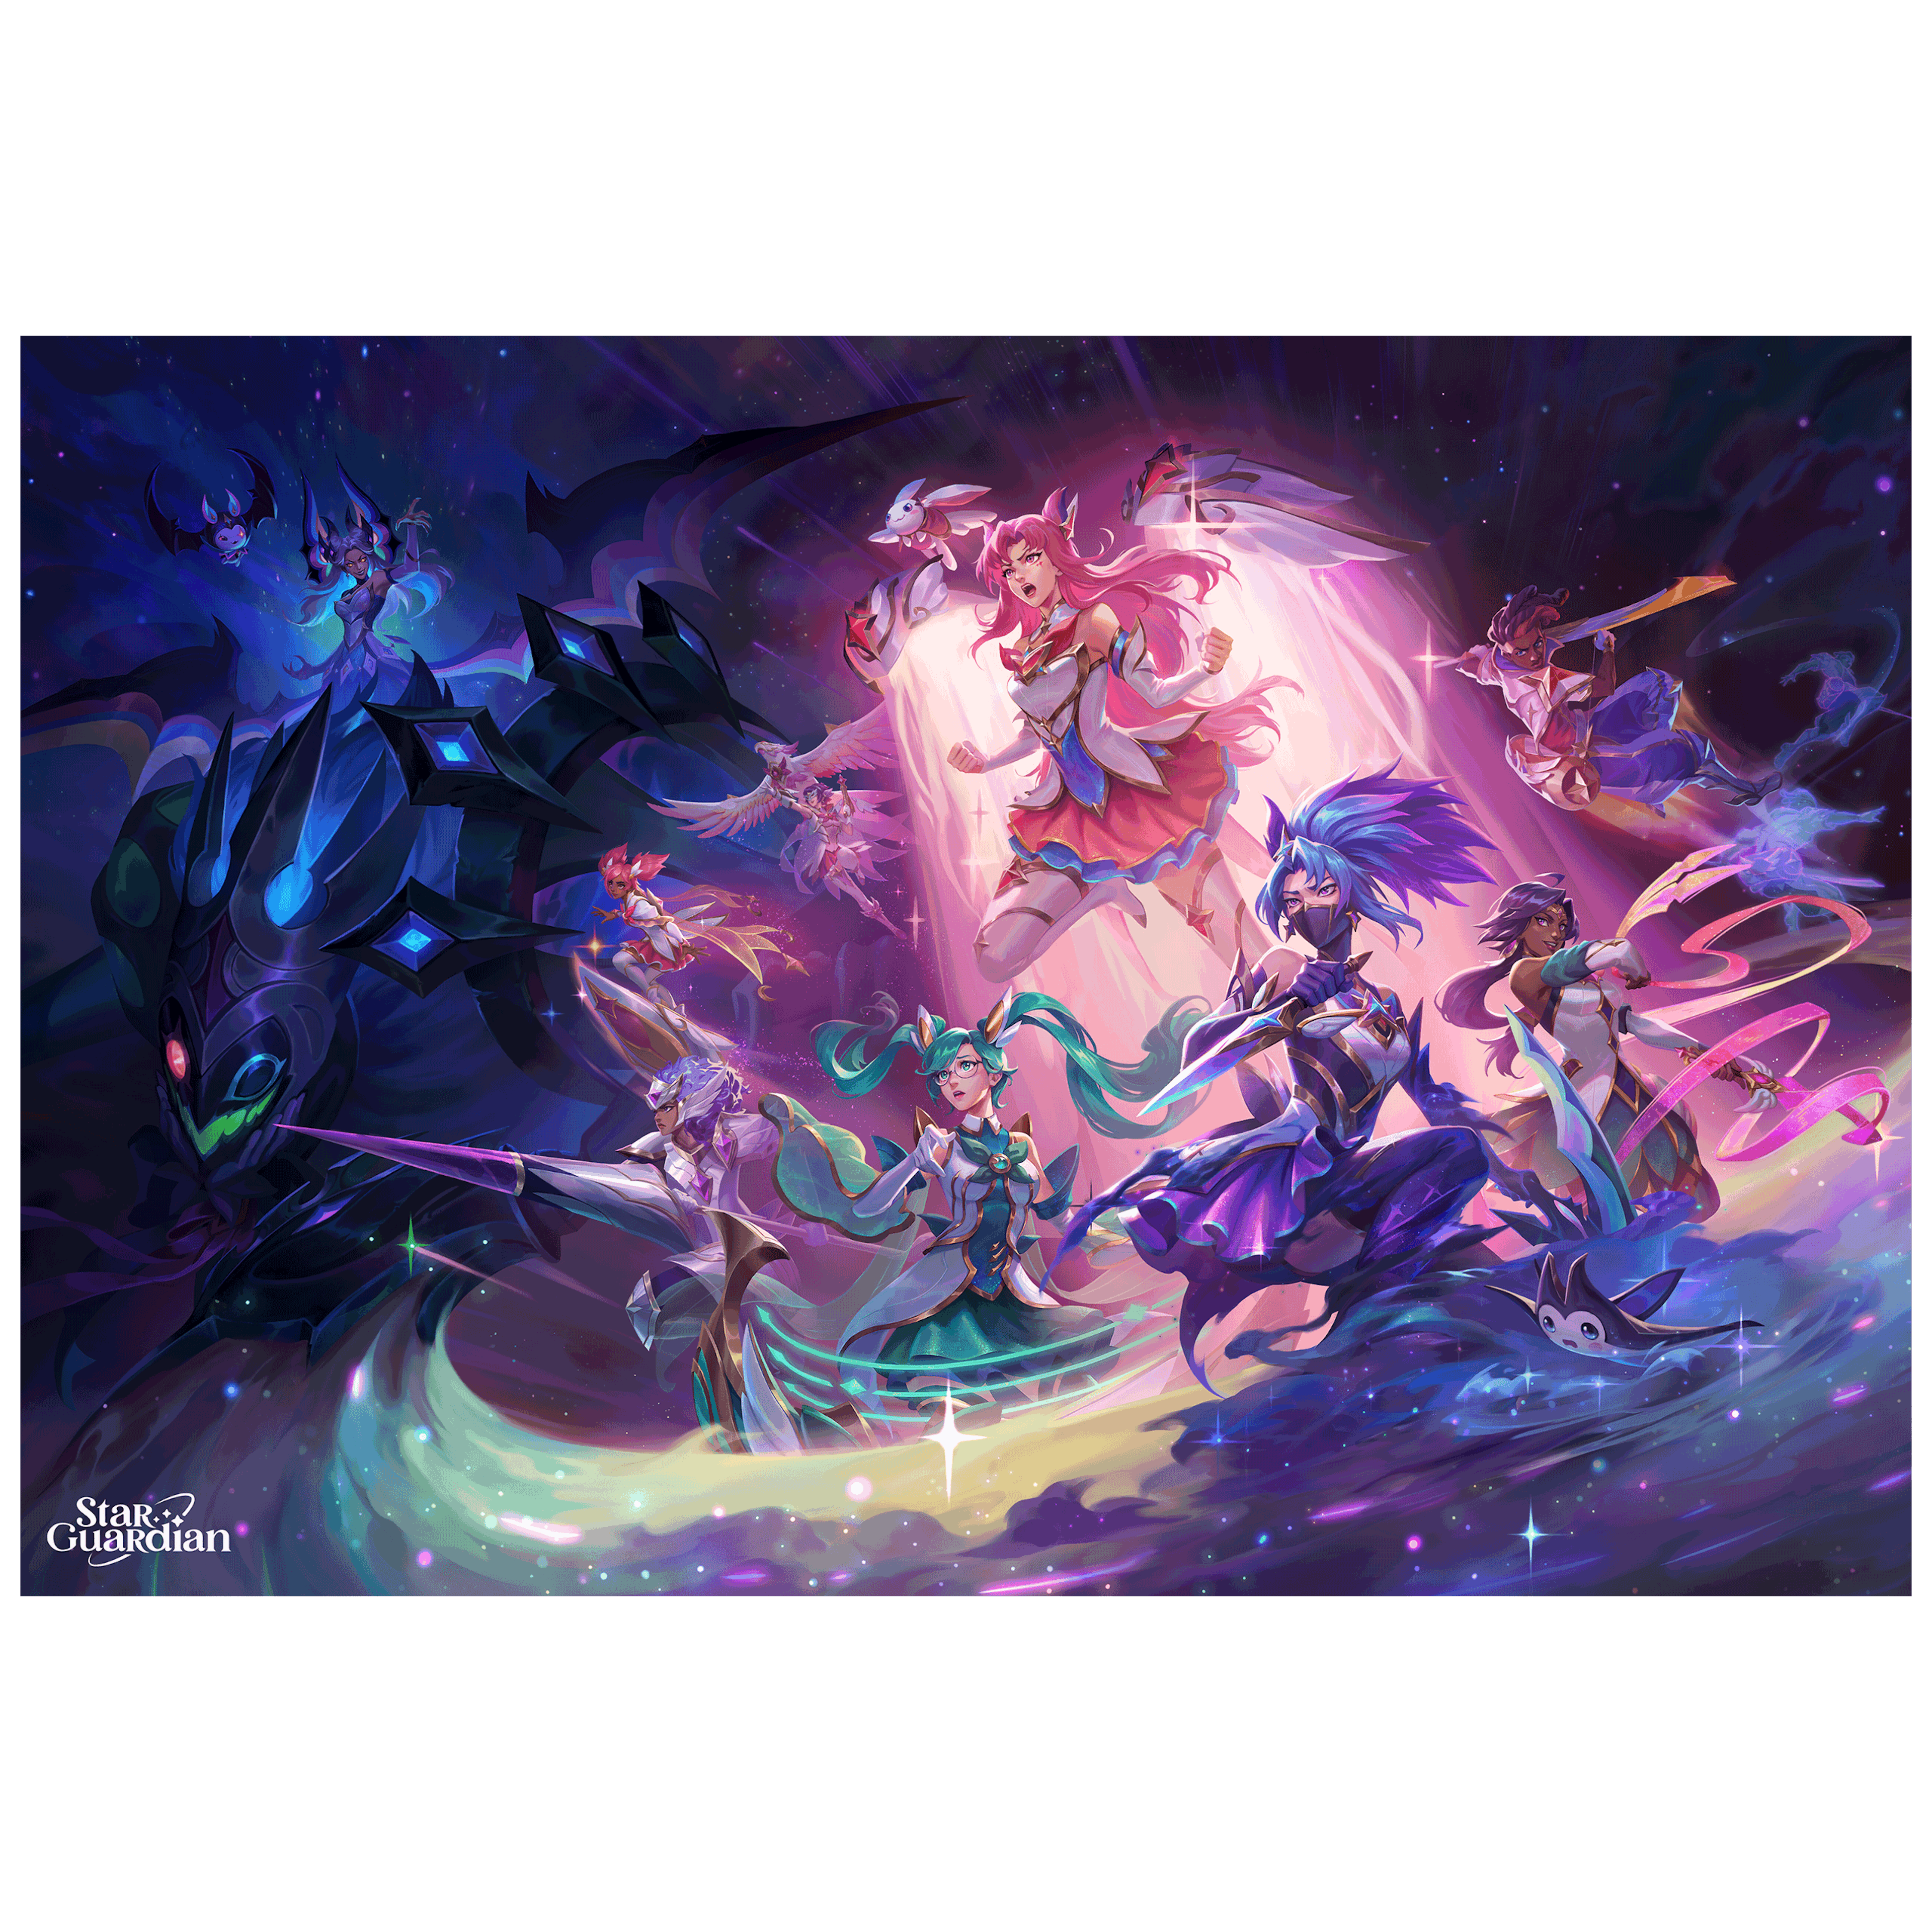 Star Guardian 2022 League of Legends Key Visual Poster